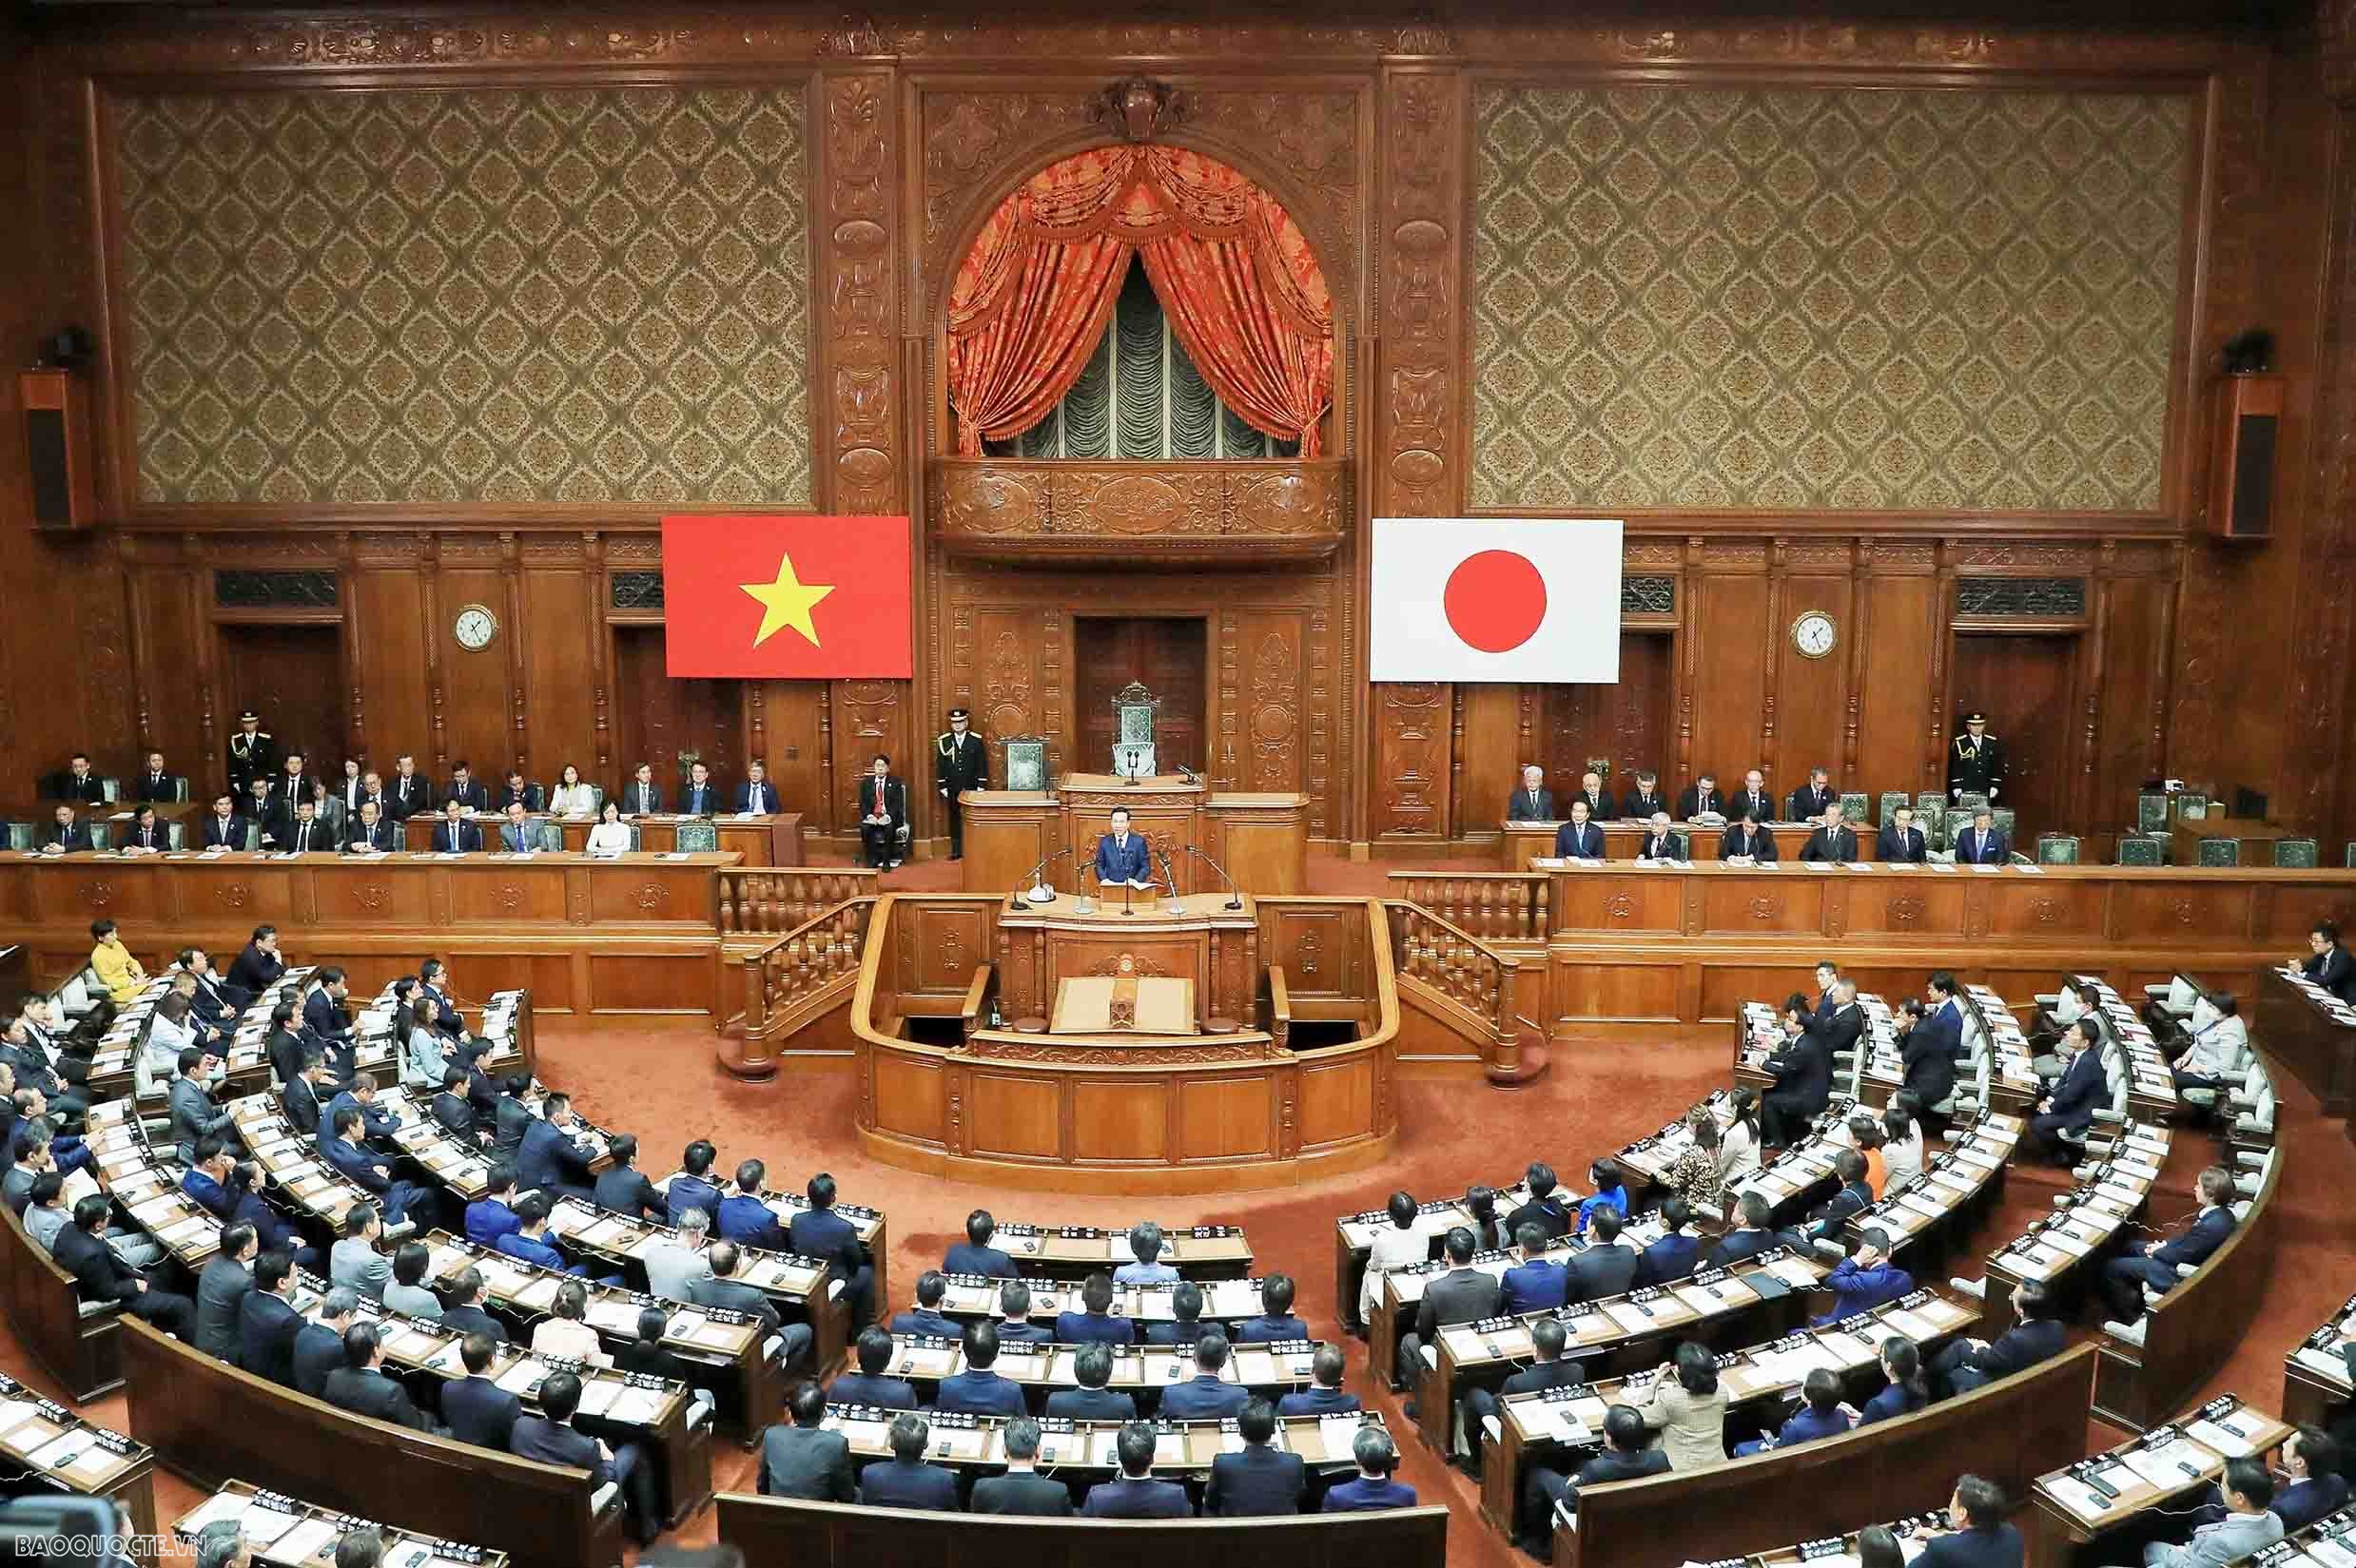 President Vo Van Thuong delivers speech at Japanese National Diet